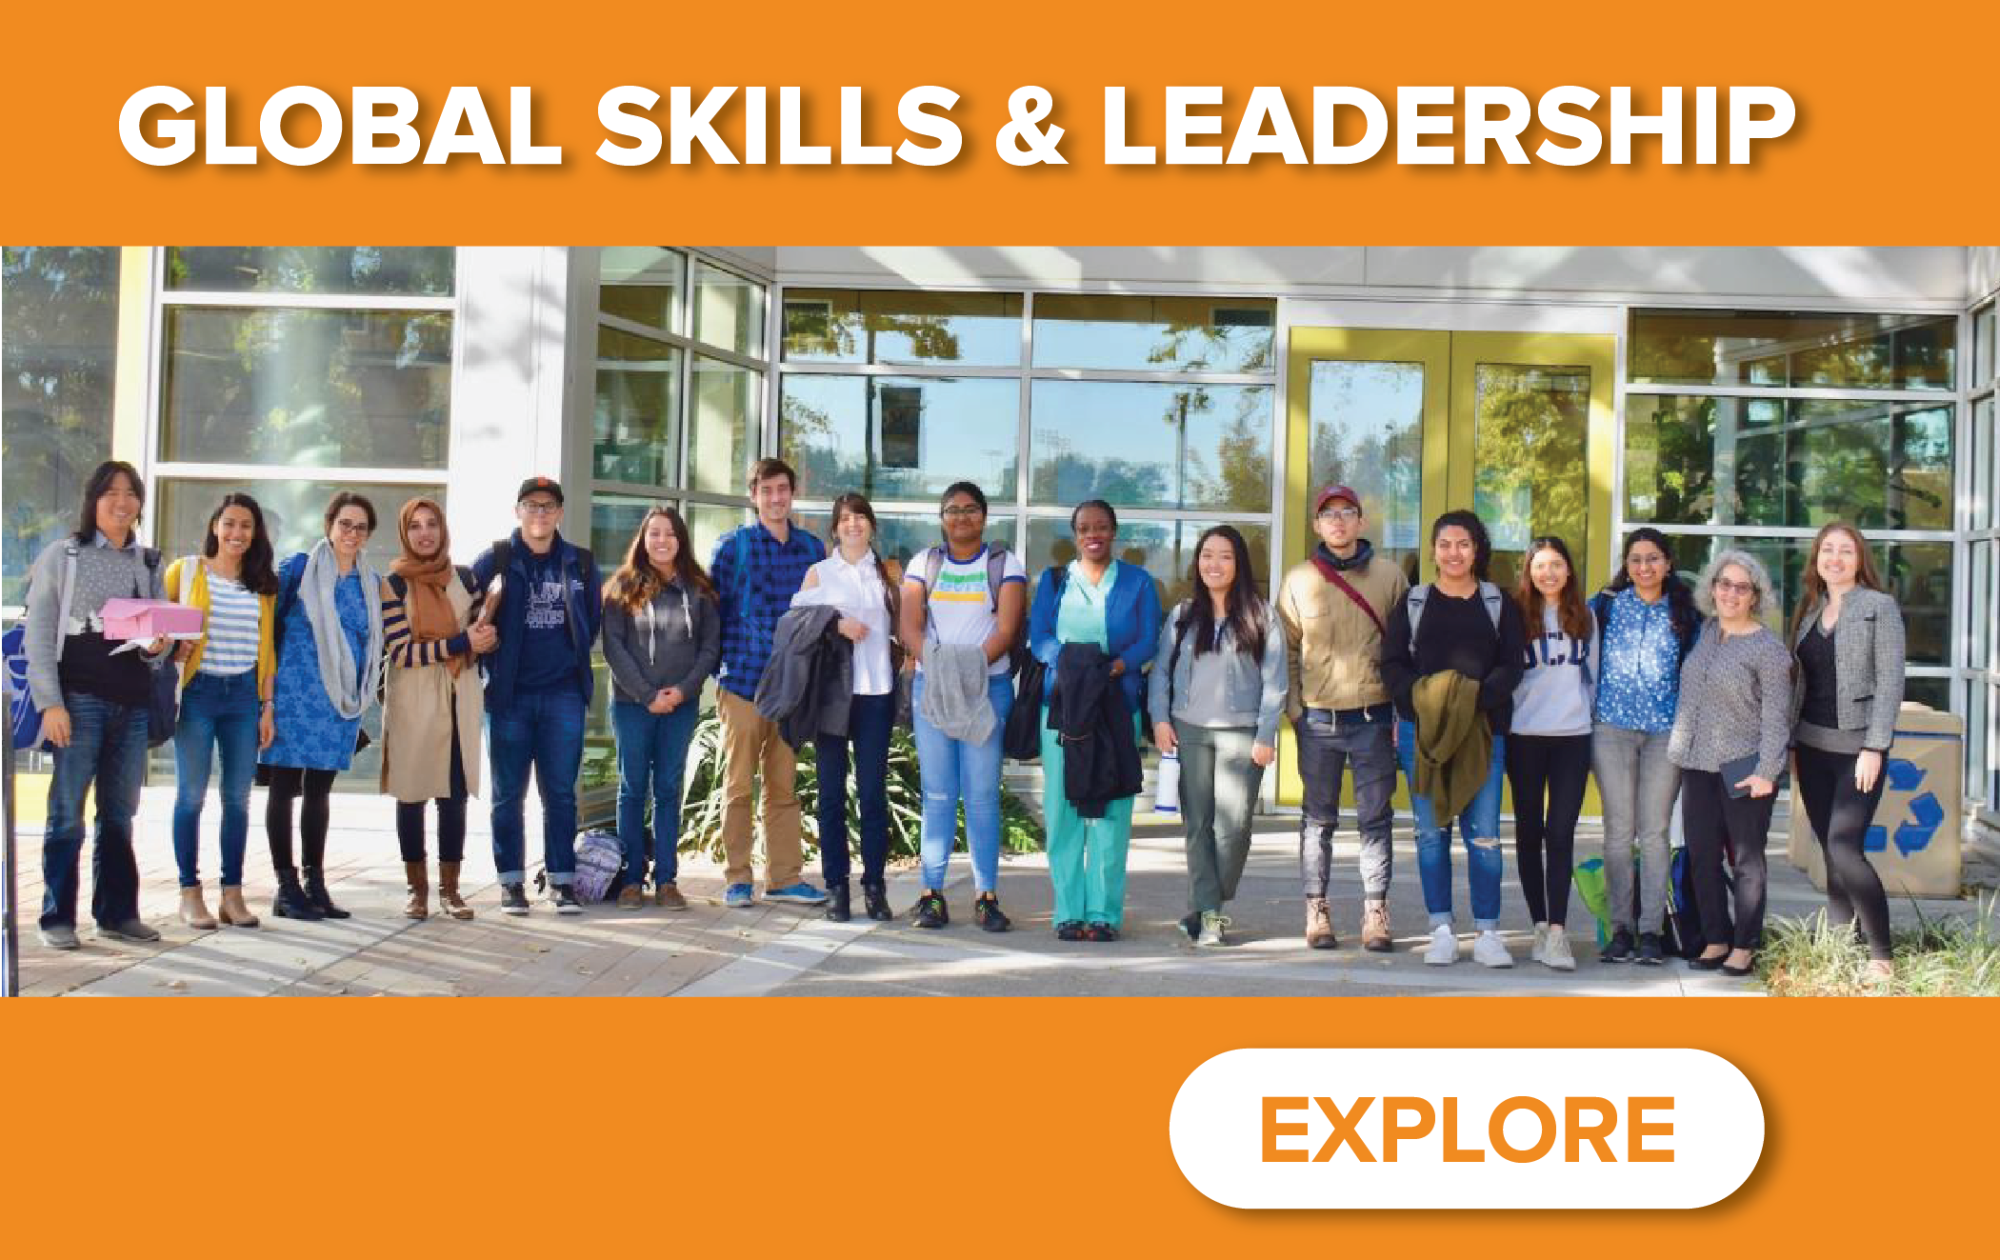 Teaser Image - Click to learn more about Global Skills and Leadership opportunities